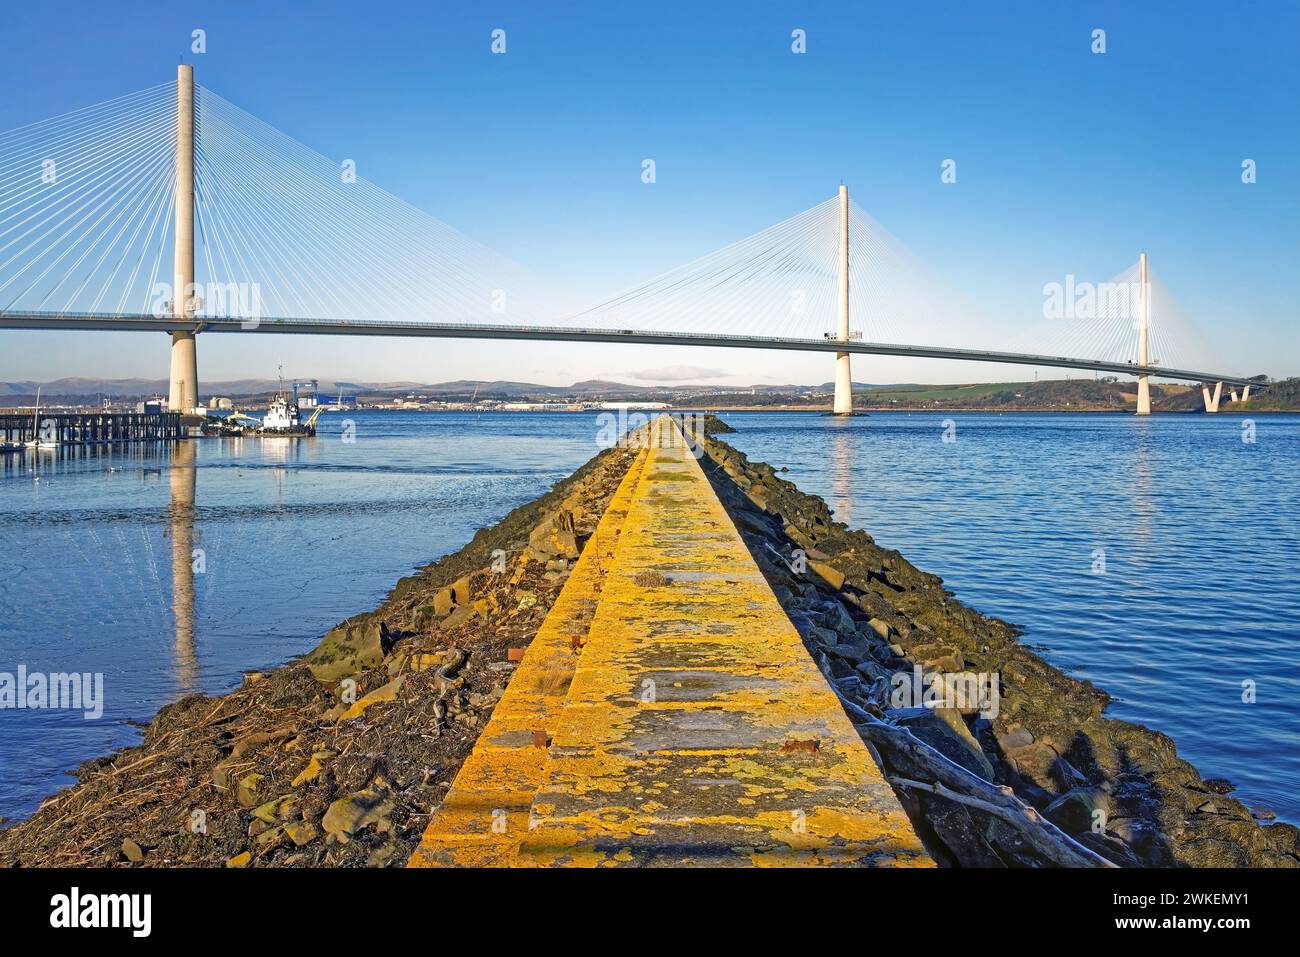 UK, Scotland, South Queensferry, Port Edgar Marina Jetty and Queensferry Crossing over the Firth of Forth. Stock Photo